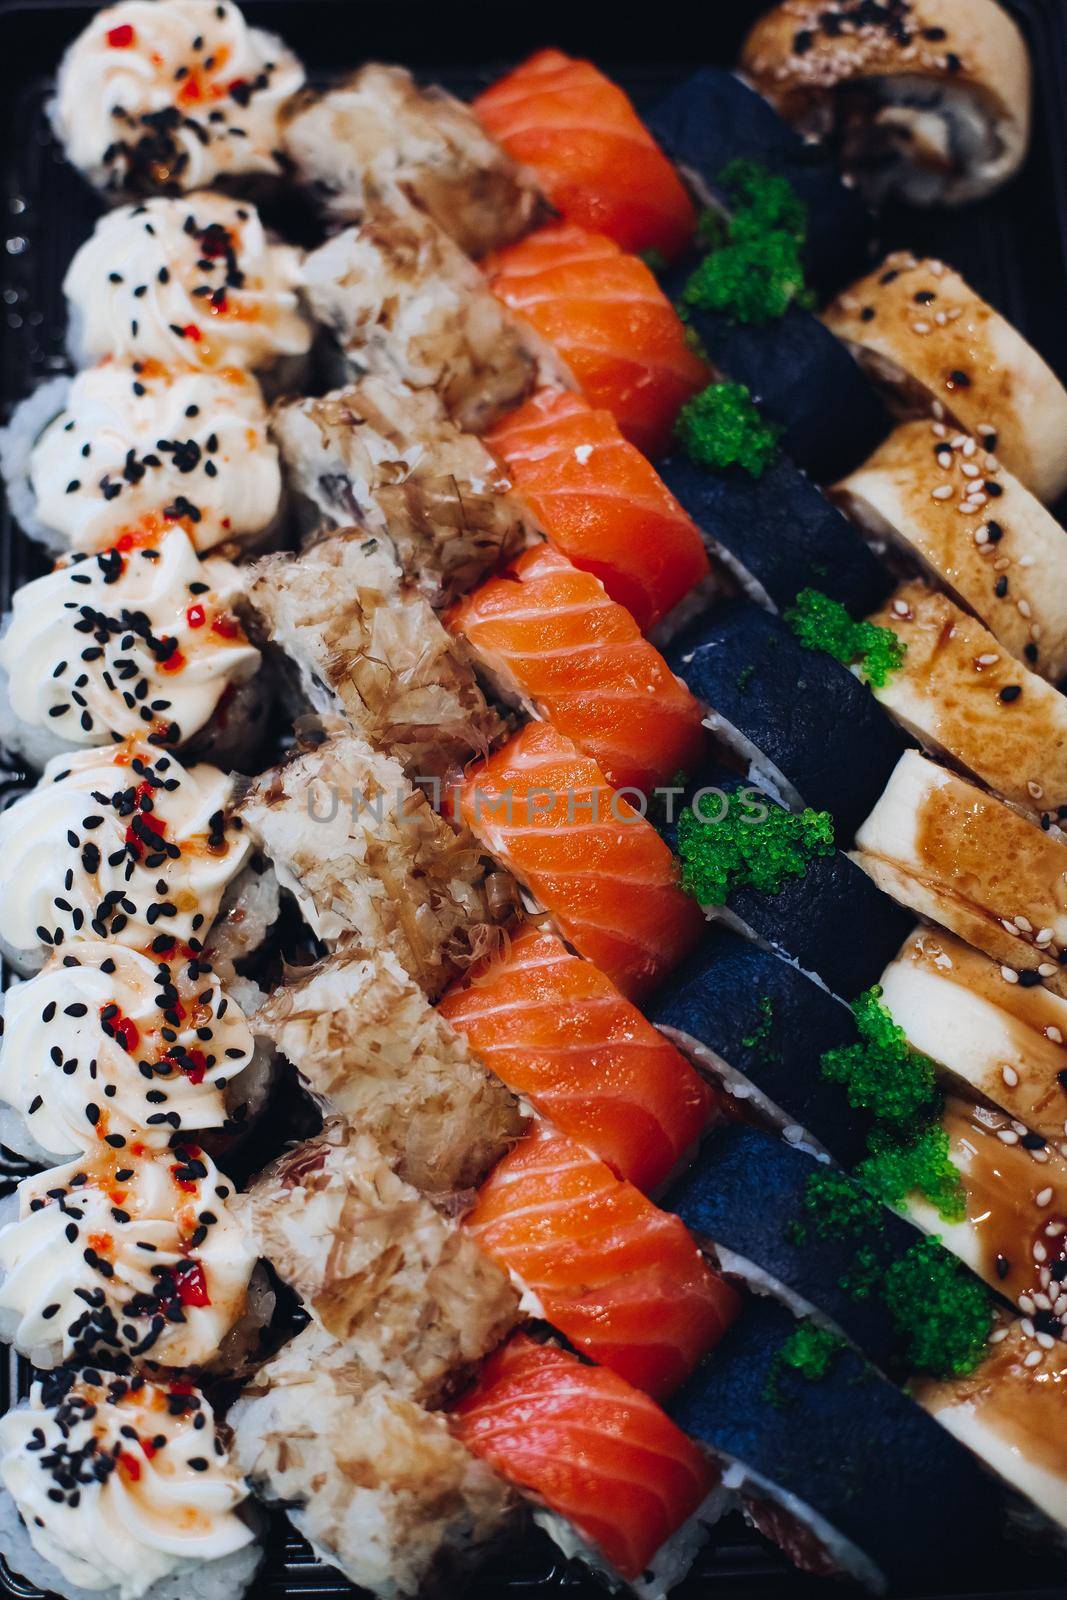 Colorful delicious mouthwatering sushi set.An interesting presentation. by StudioLucky